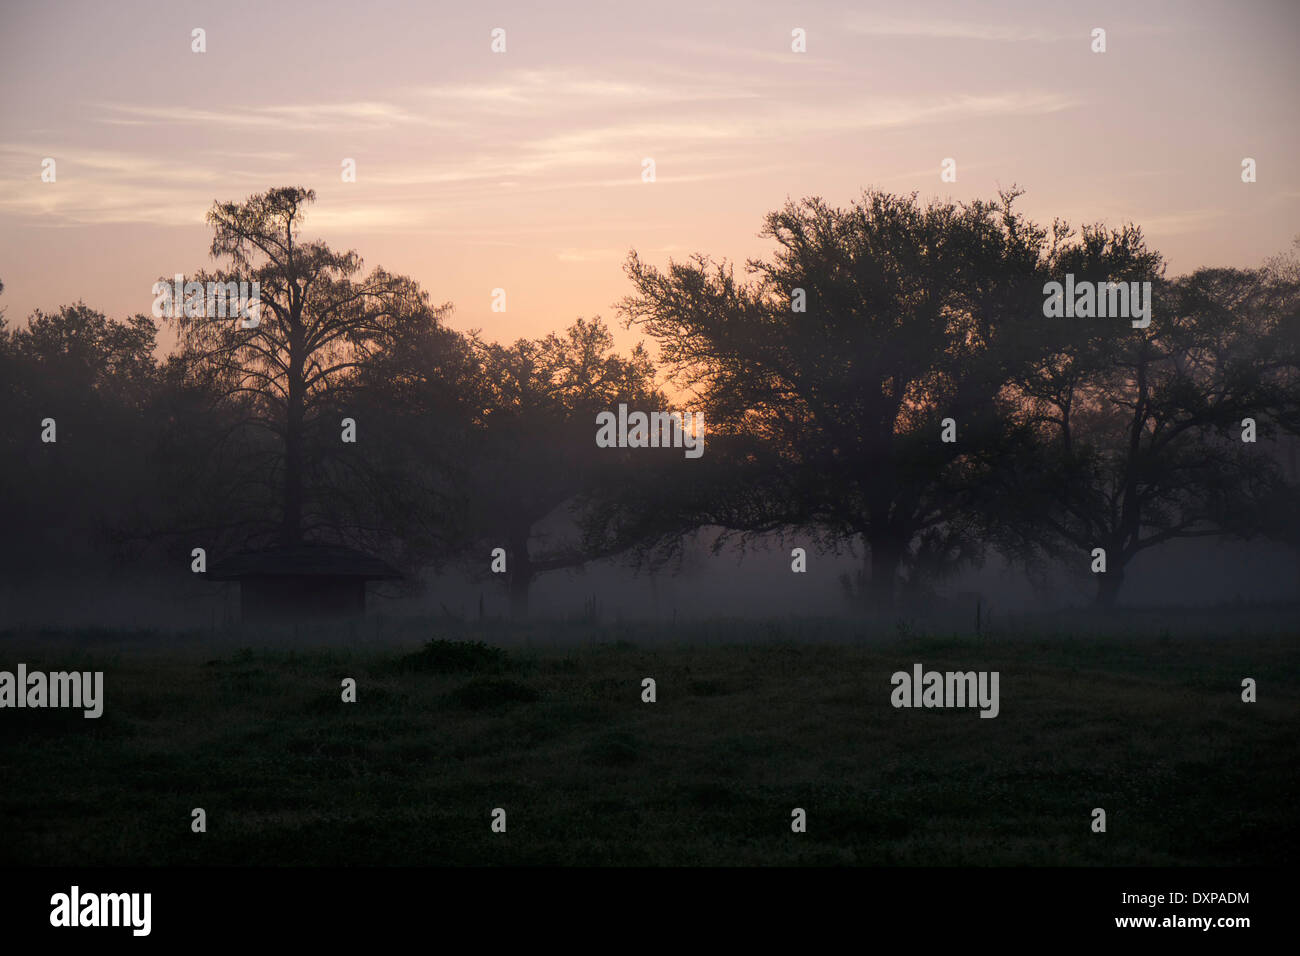 Oak and Cypress trees shrouded in mist at Sunrise in City Park in New Orleans, Louisiana. Stock Photo